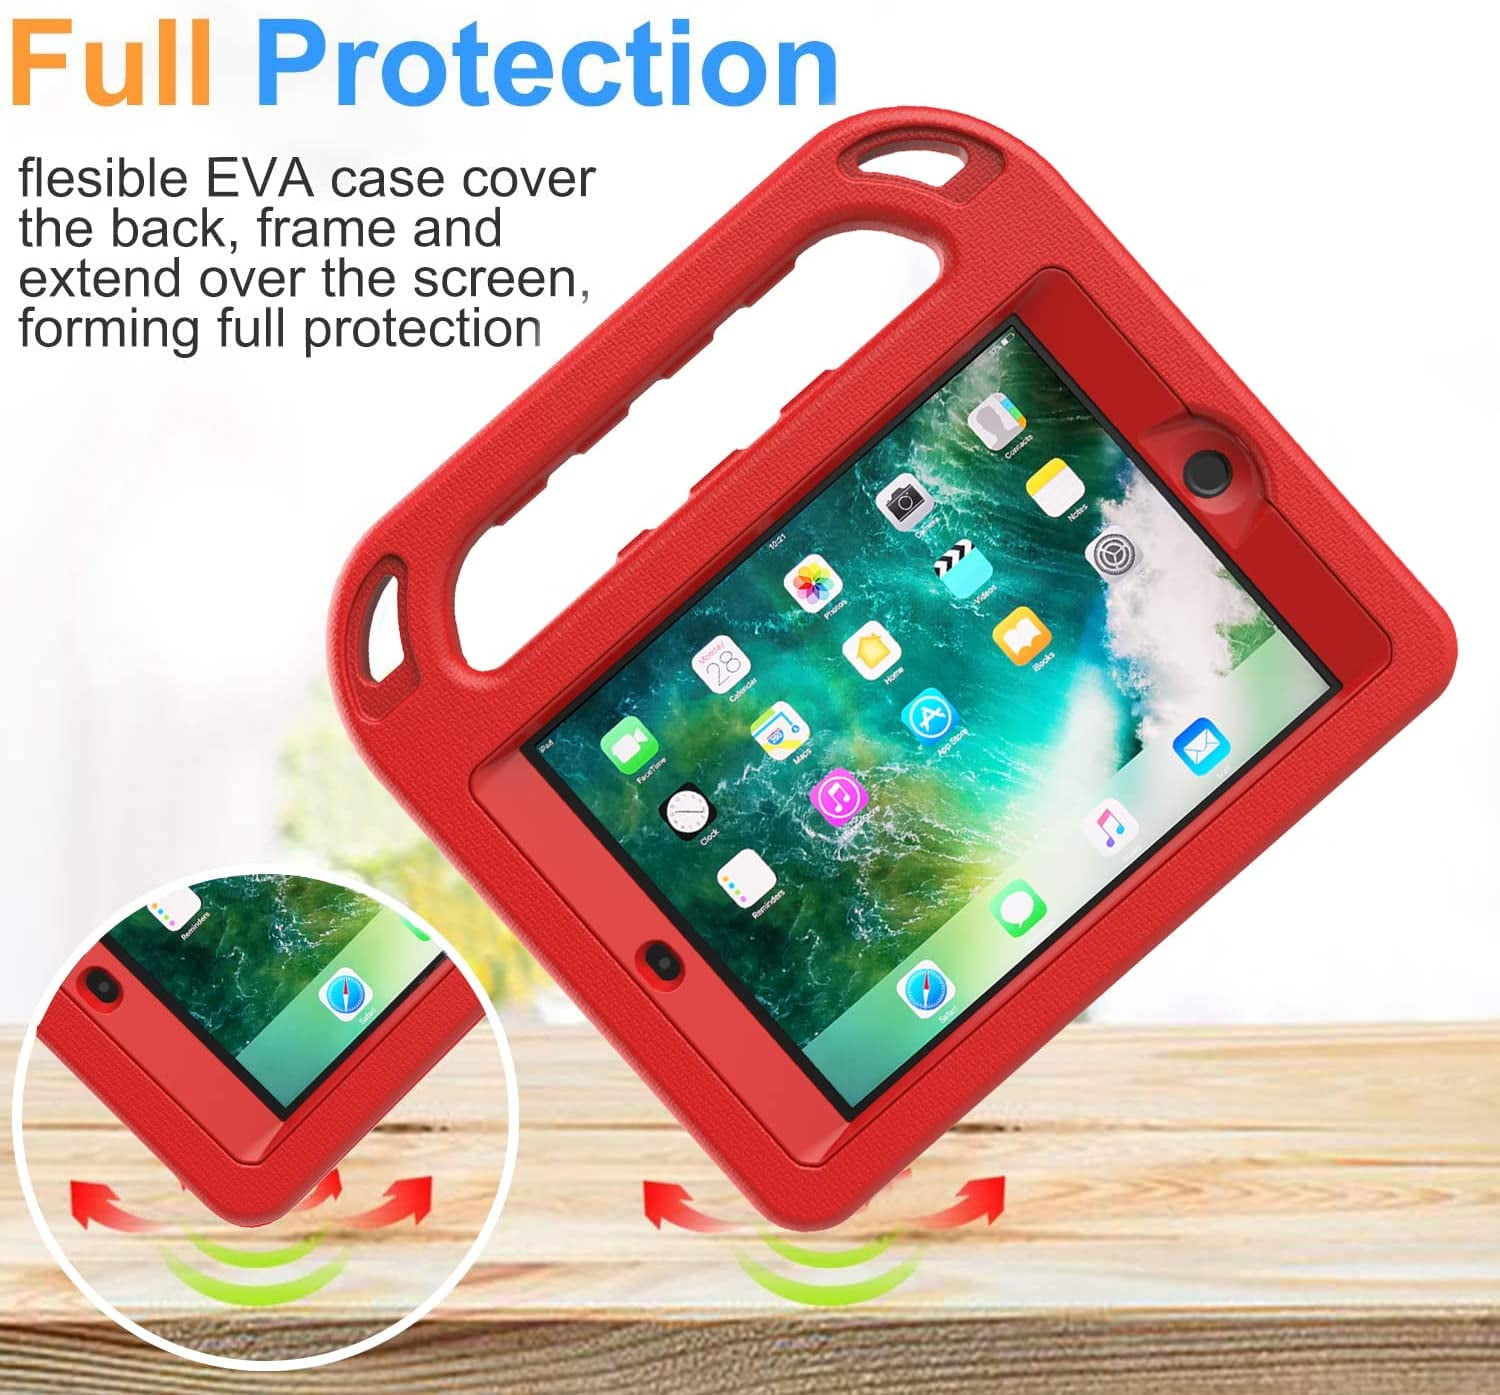 Full Body Rugged Boys Girls Cover for Apple iPad Mini 1st Generation 2nd Gen 3rd Gen 7.9 inch PEPKOO Kids Case for iPad Mini 1 2 3 – Lightweight Flexible Shockproof Pink Blue Folding Handle Stand